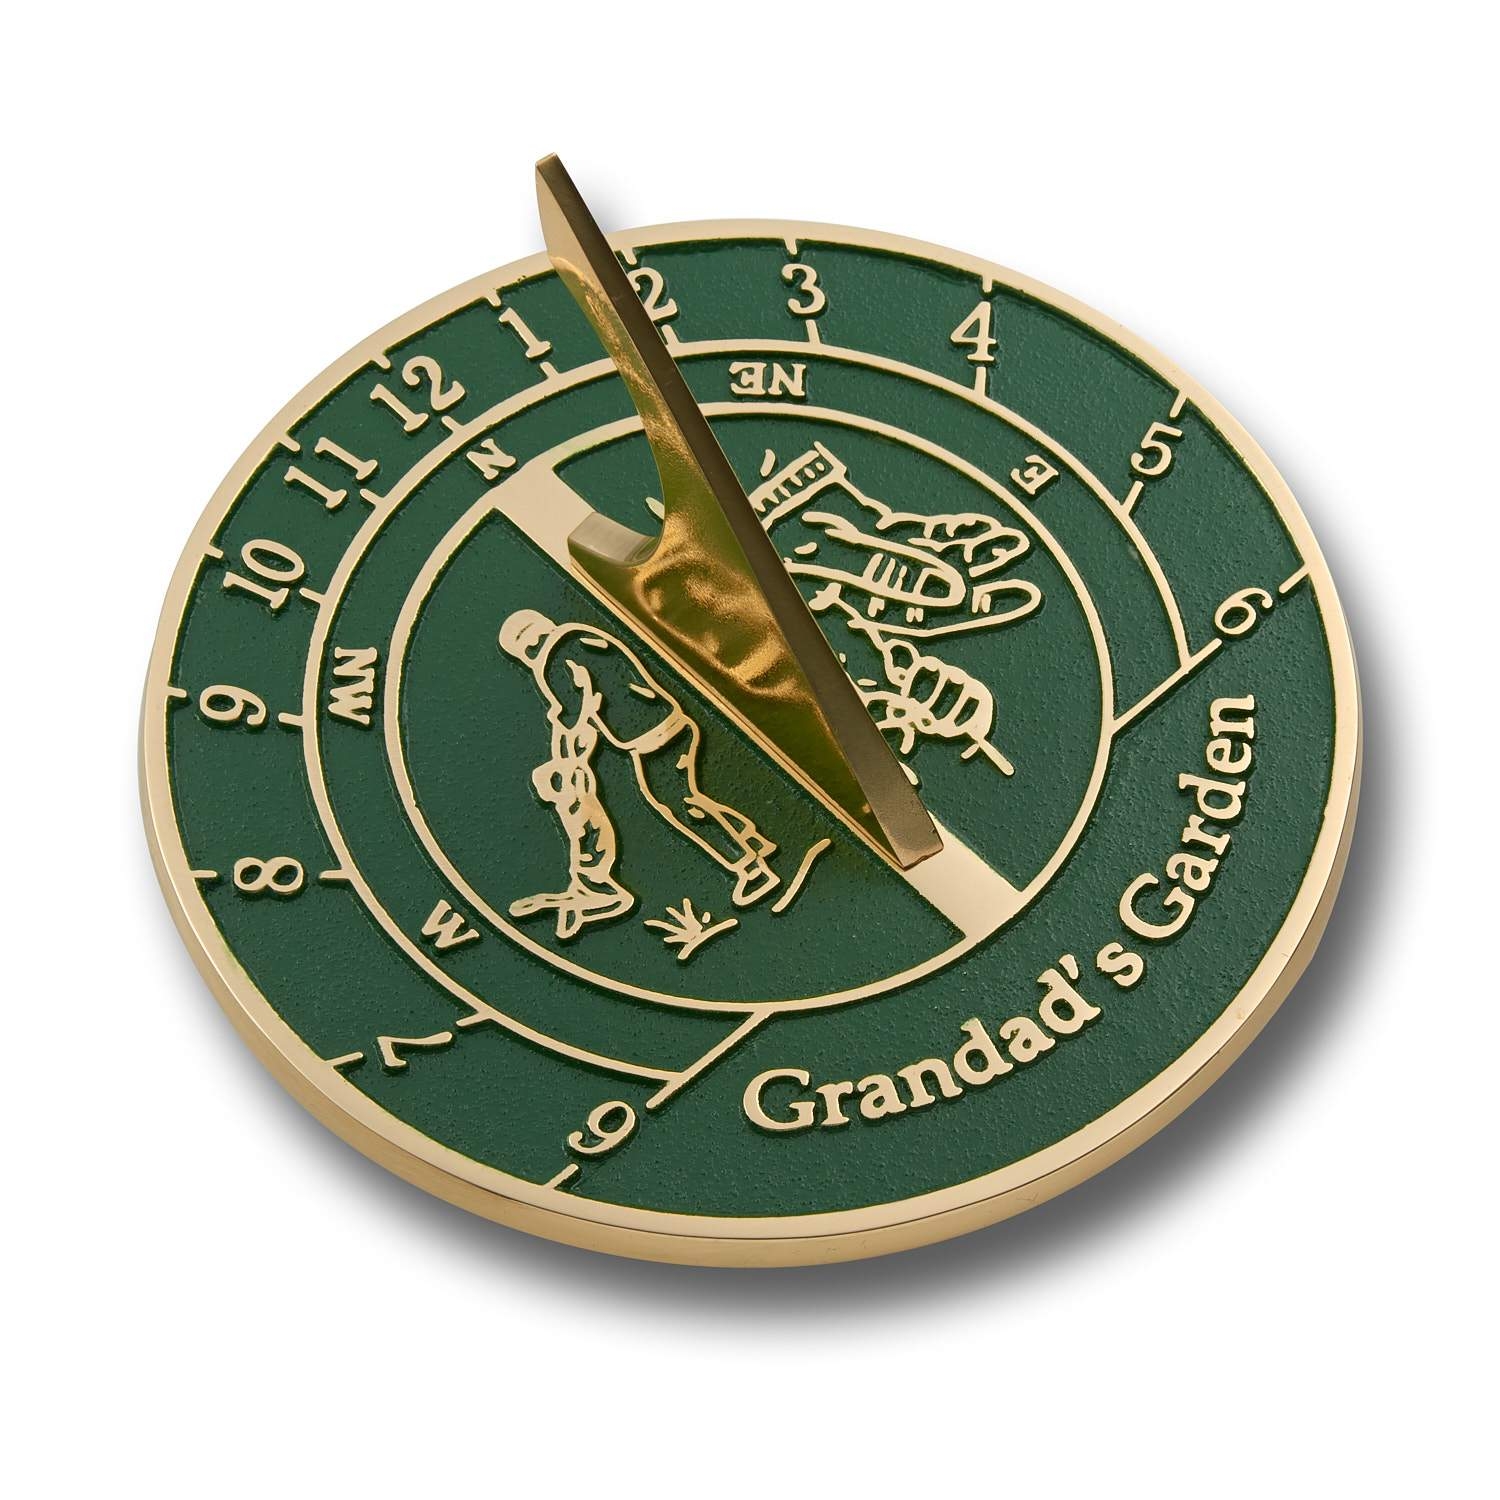 Grandad’s Garden Sundial Gift. Great New Idea For His Garden Or Indoor Ornament As A Lasting Birthday, Christmas Or Fathers Day Card